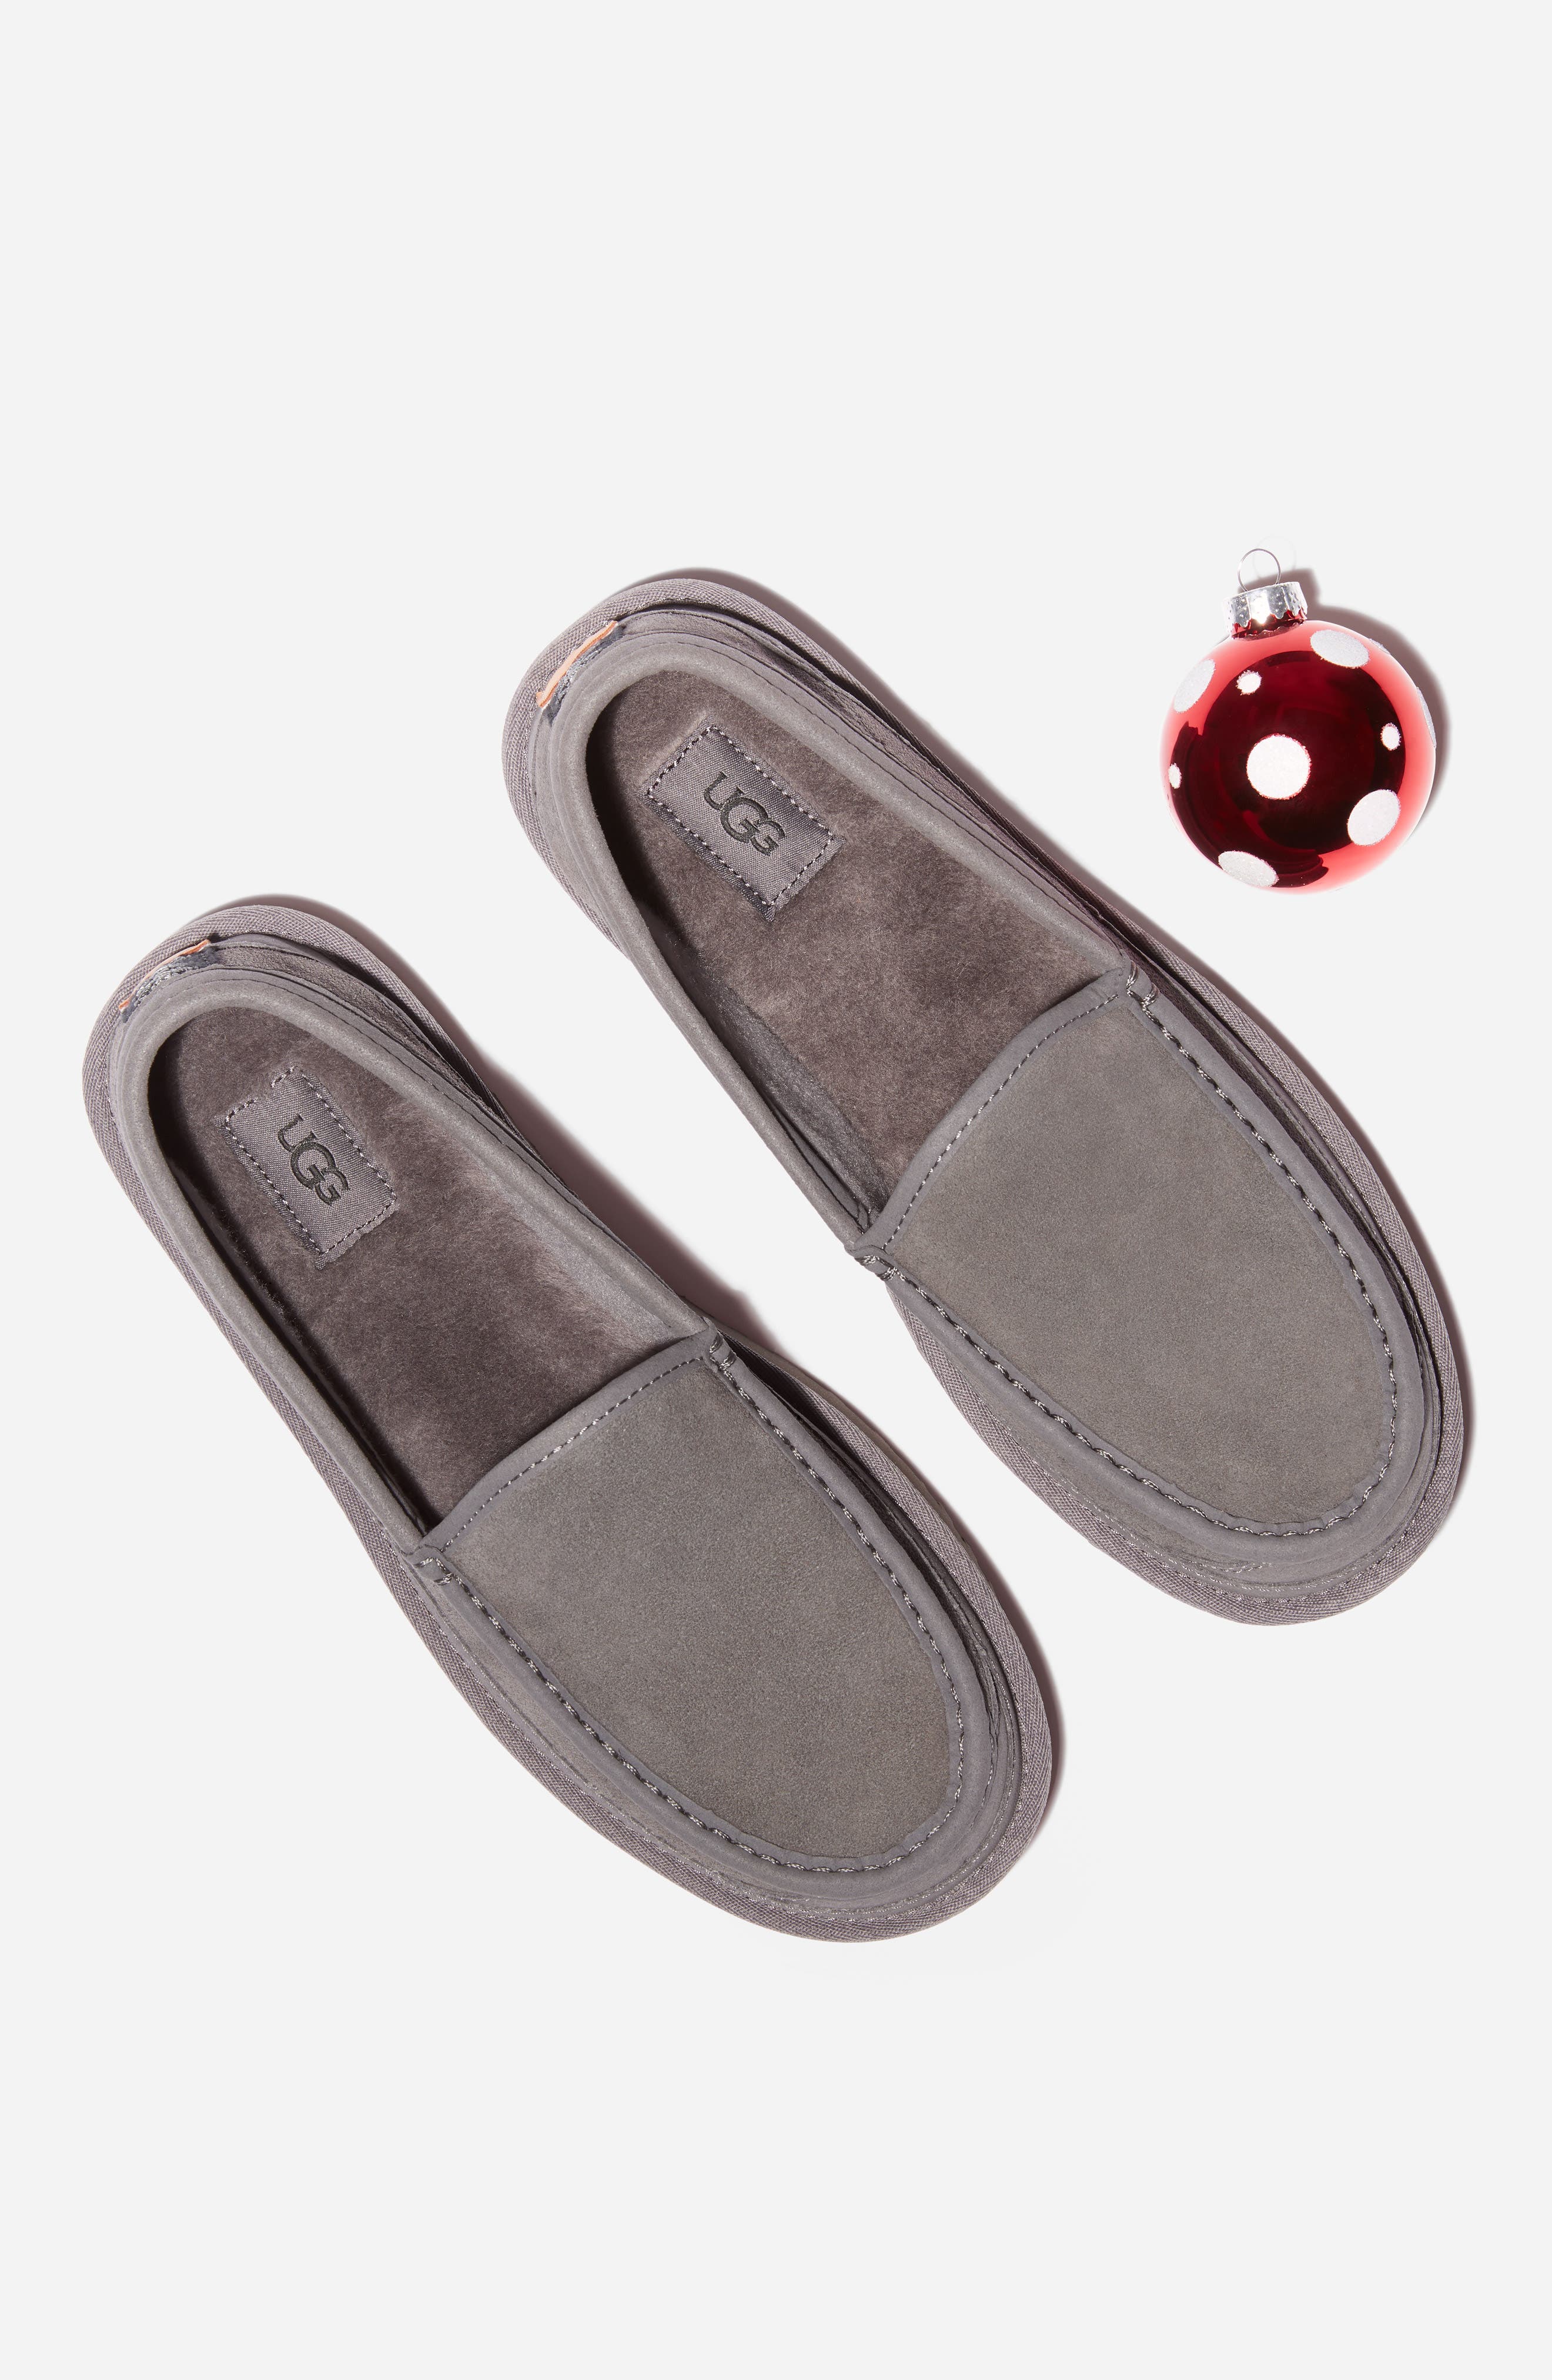 classic uggpure lined water resistant slipper